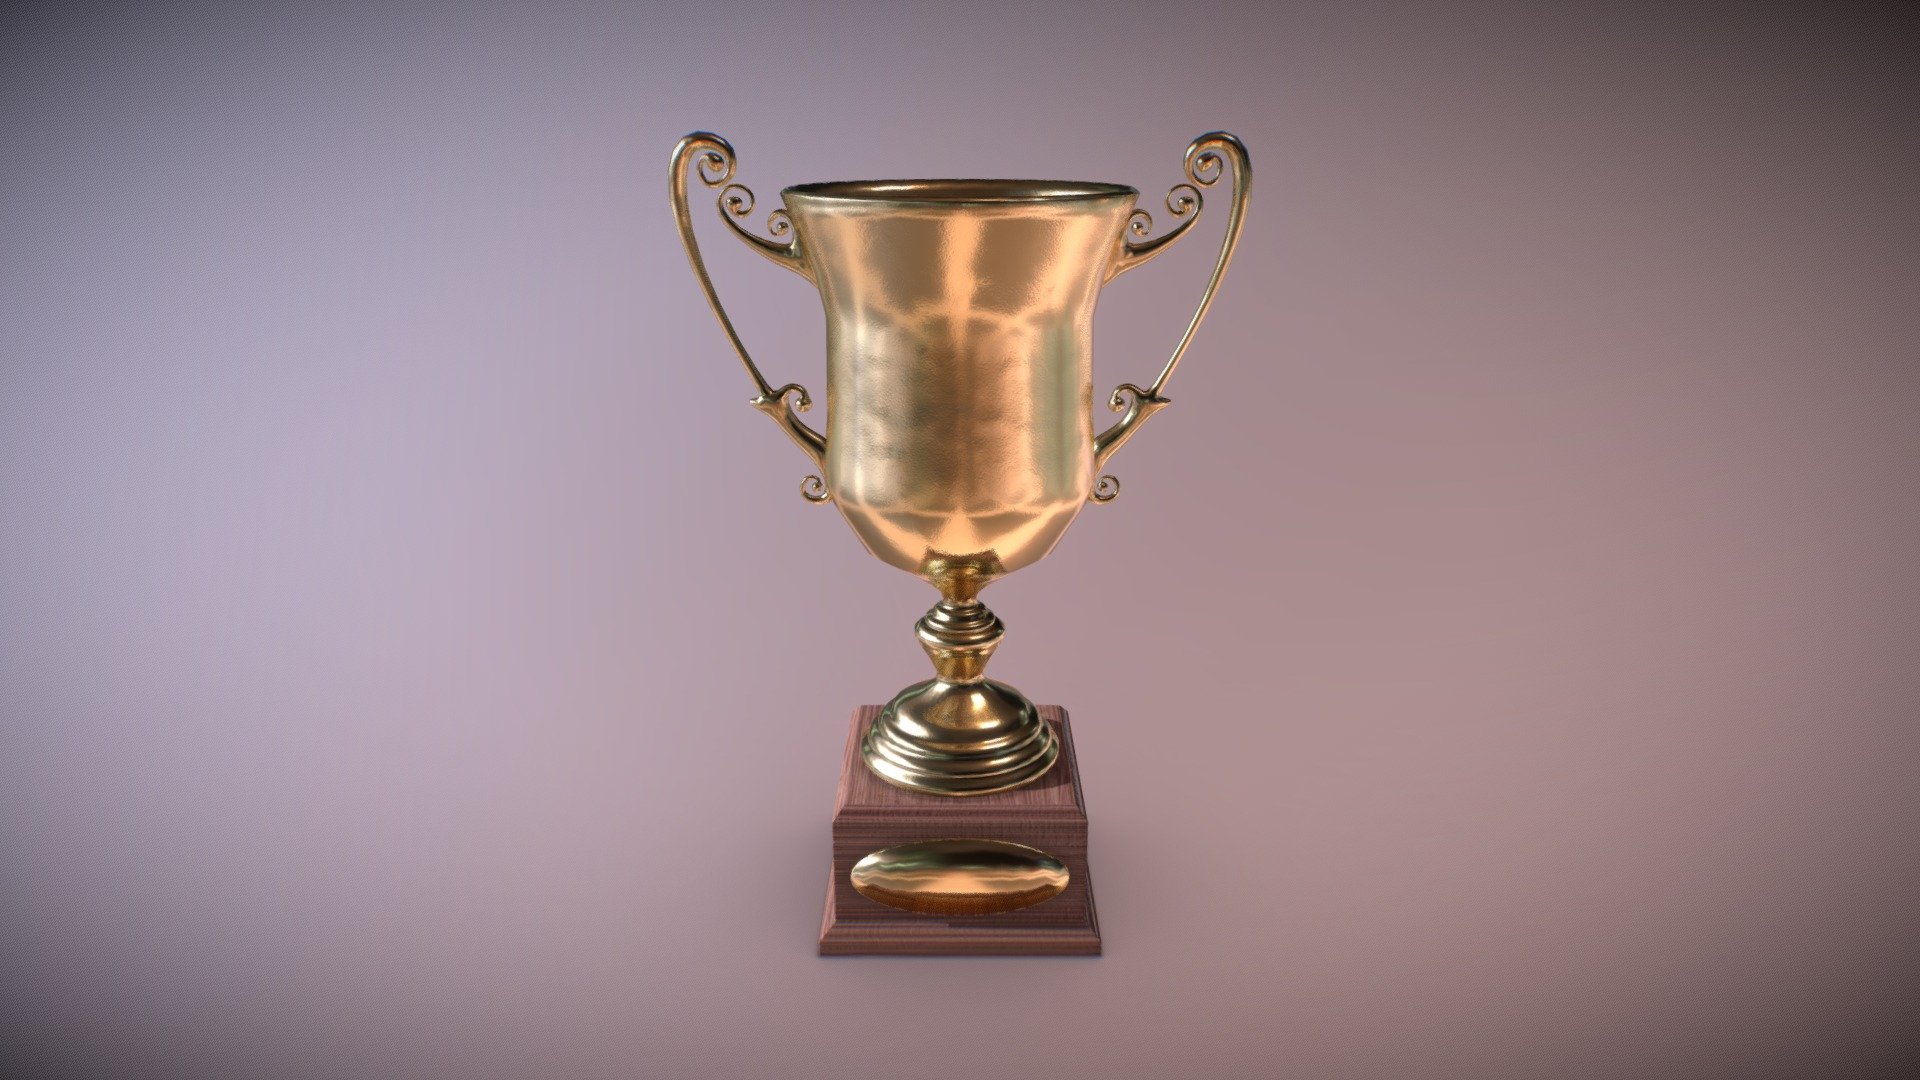 3D low-poly model of Golden Trophy

It sparkles beautifully in the sun.

PBR 2k texture set + AO effect. Can be used anywhere you need 3d model